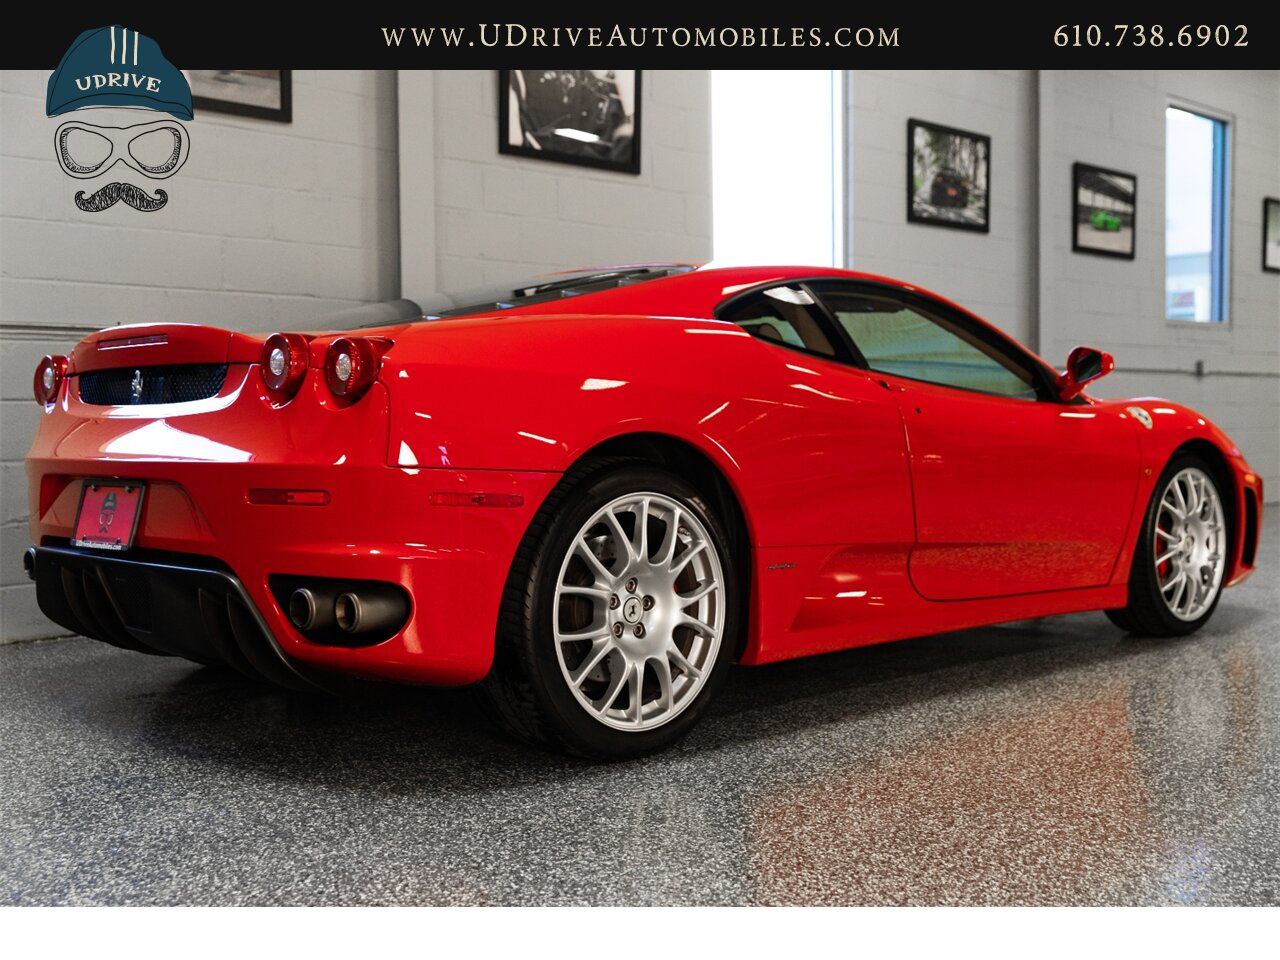 2006 Ferrari F430 F1 Coupe 1 Owner Daytona Seats Challenge Whls  Carbon Fibre Upper Lower Zone Shields Piping Serv Hist $208k MSRP - Photo 16 - West Chester, PA 19382